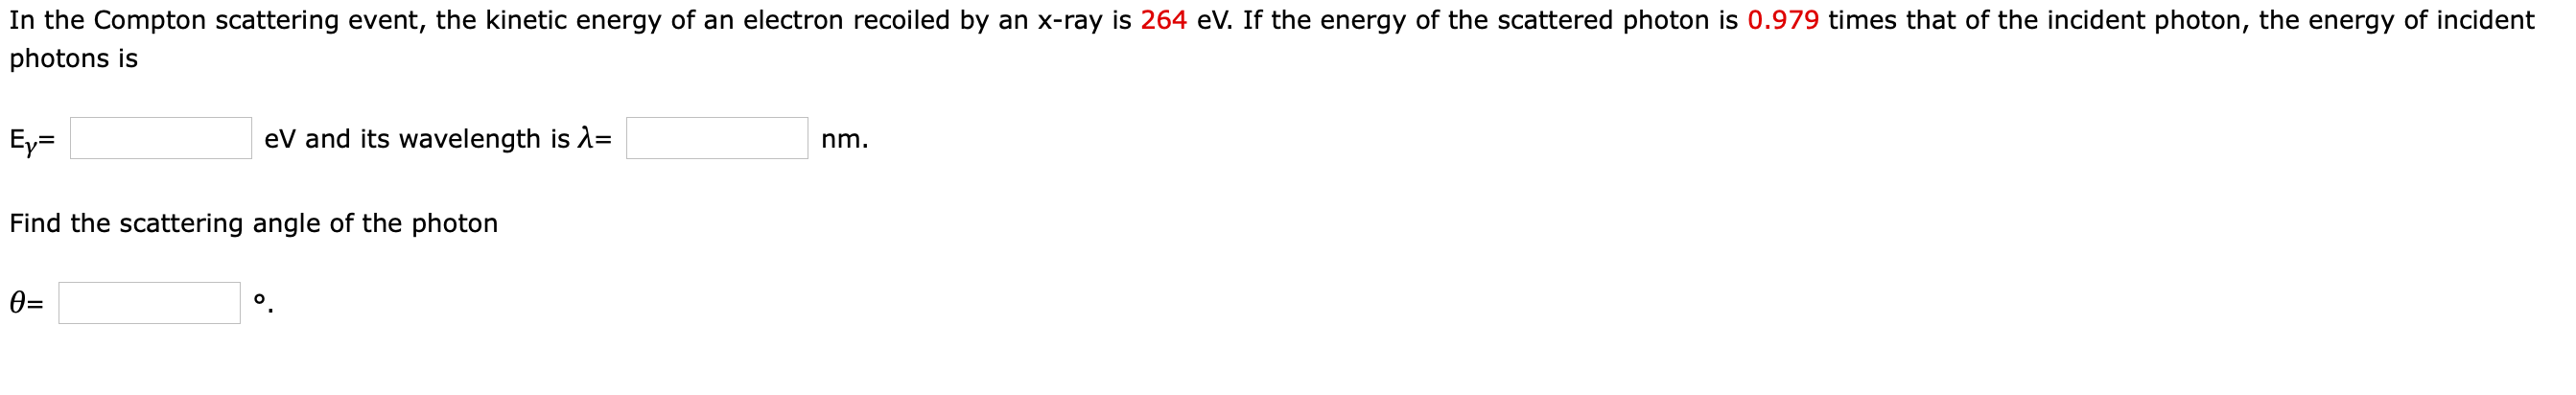 In the Compton scattering event, the kinetic energy of an electron recoiled by an x-ray is 264 eV. If the energy of the scattered photon is 0.979 times that of the incident photon, the energy of incident
photons is
Ey=
eV and its wavelength is 2=
nm.
Find the scattering angle of the photon
0=
